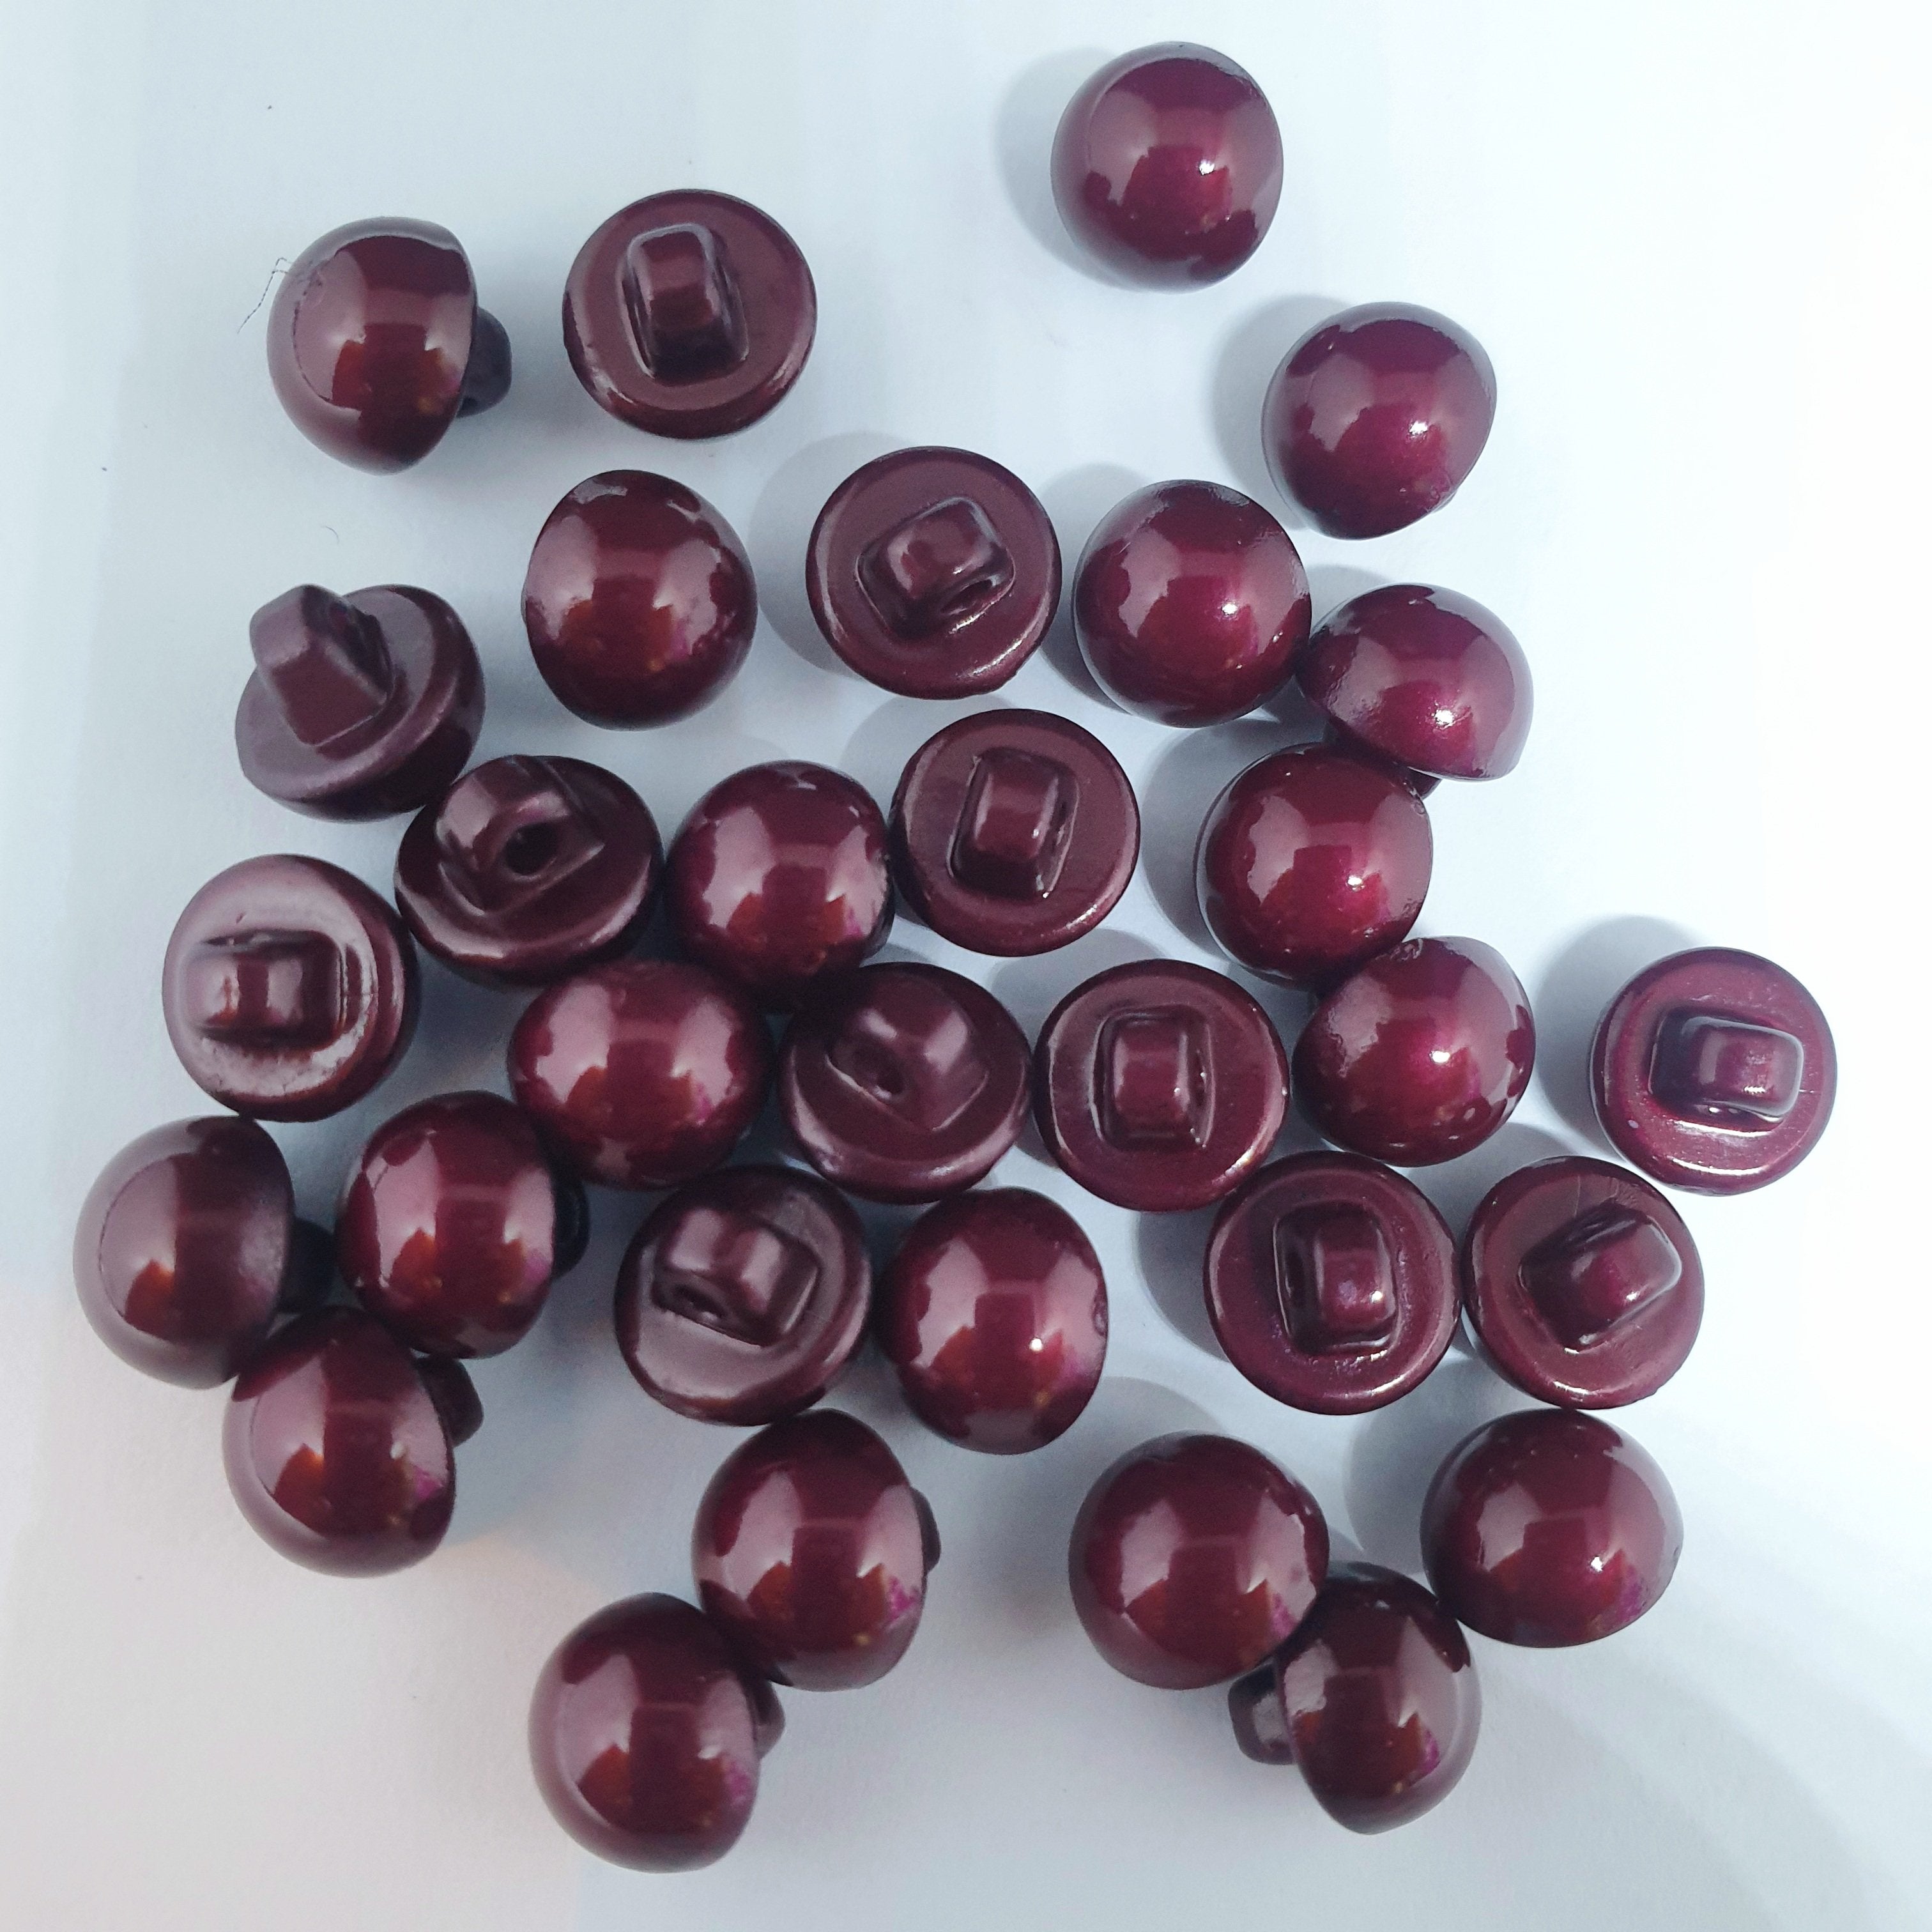 MajorCrafts 30pcs 10mm Burgundy Red High-Grade Acrylic Small Round Sewing Mushroom Shank Buttons